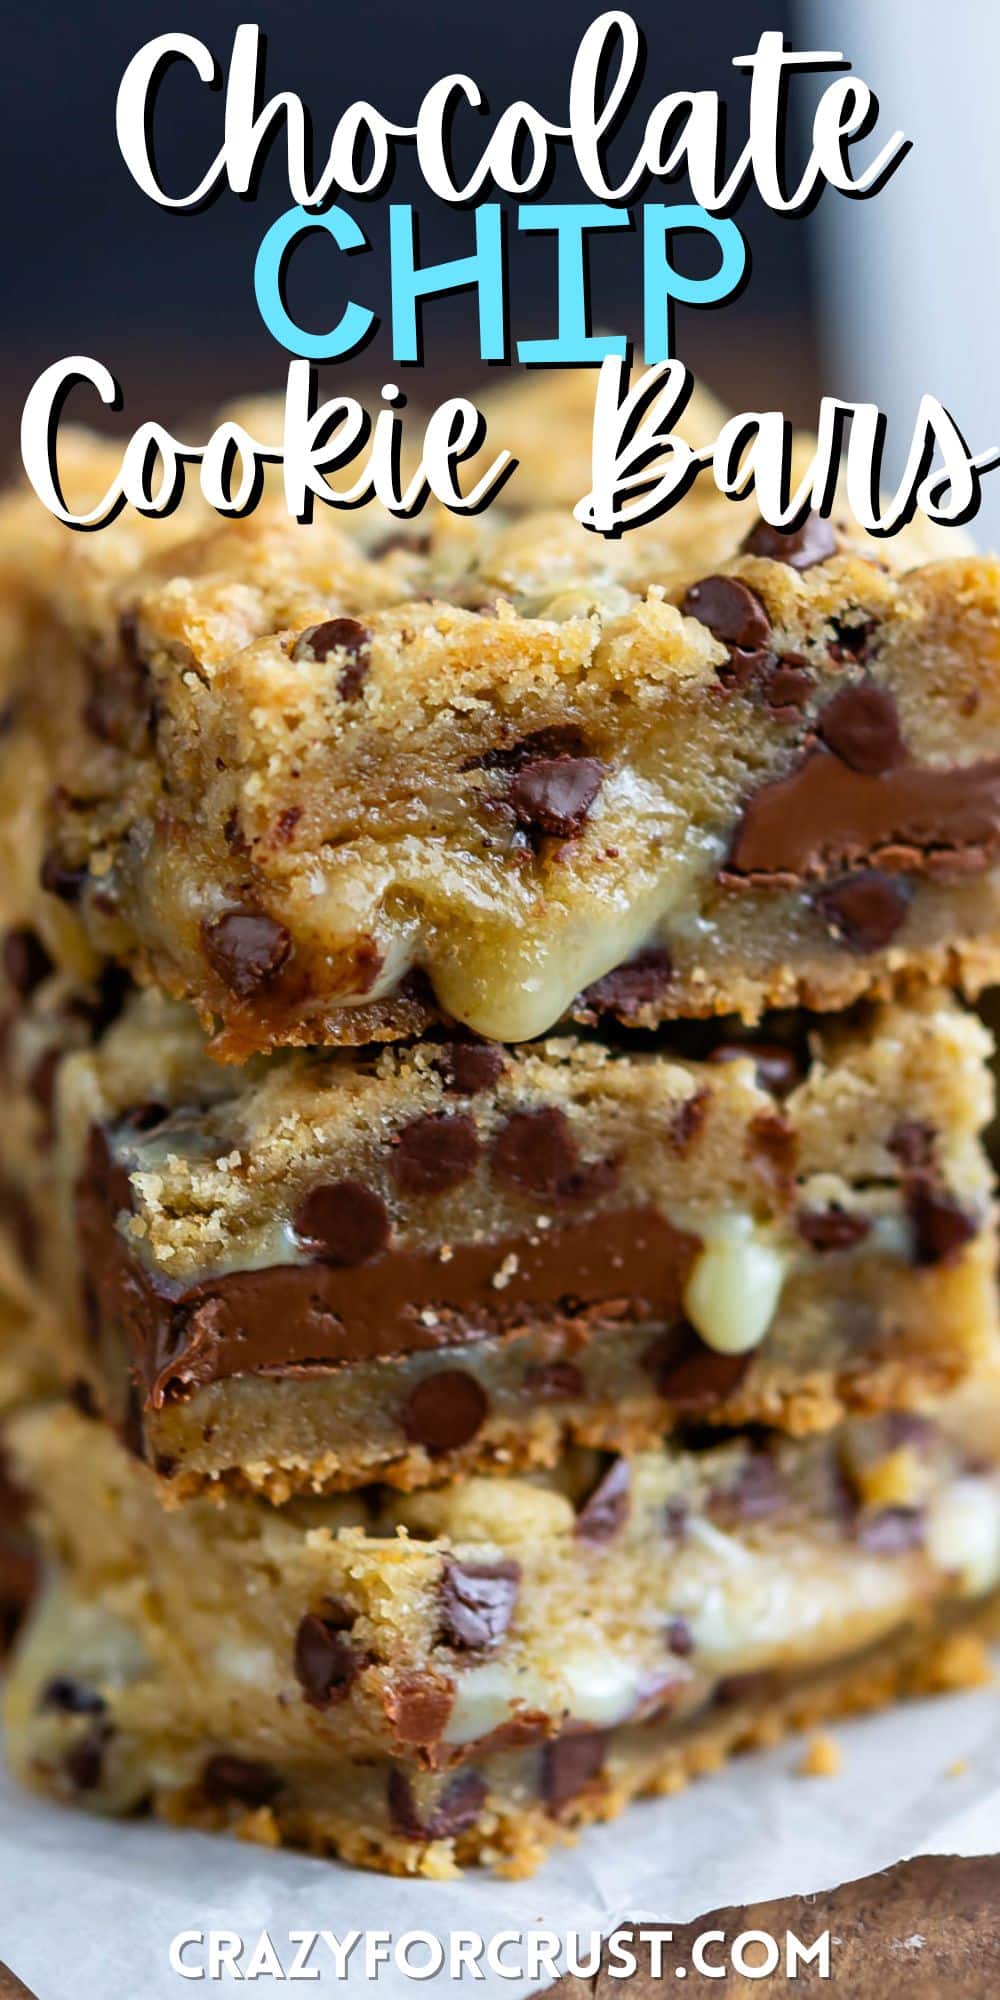 stacked gooey bars with chocolate chips baked into the center with words on the image.